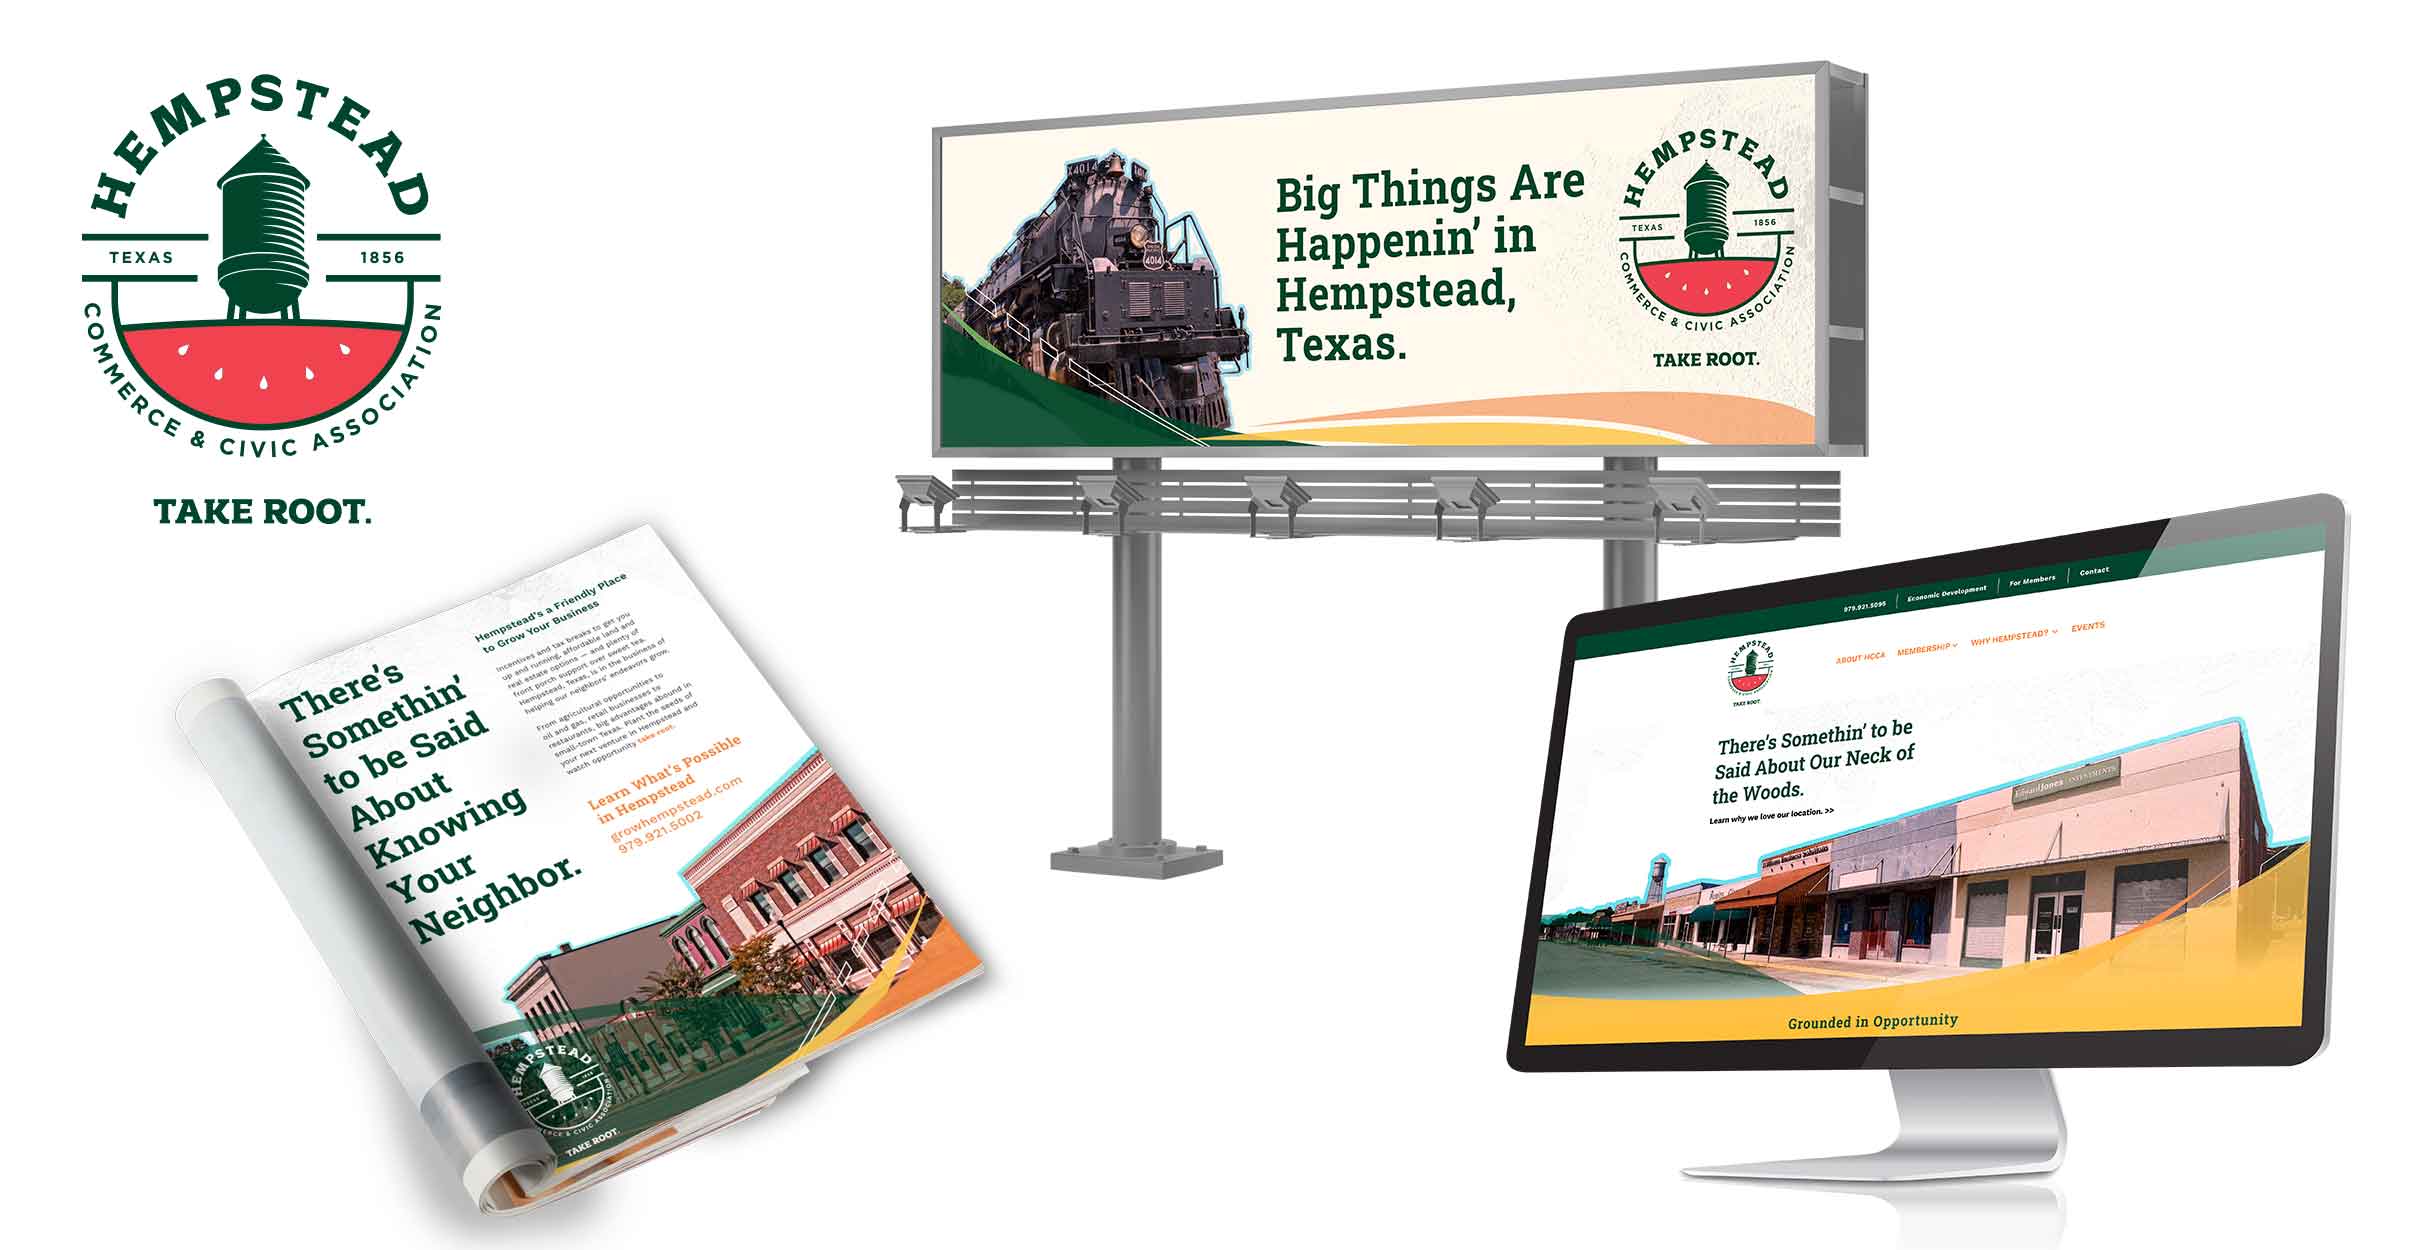 Magazine ad, billboard and website nonprofit marketing examples for the Hempstead Commerce & Civic Association